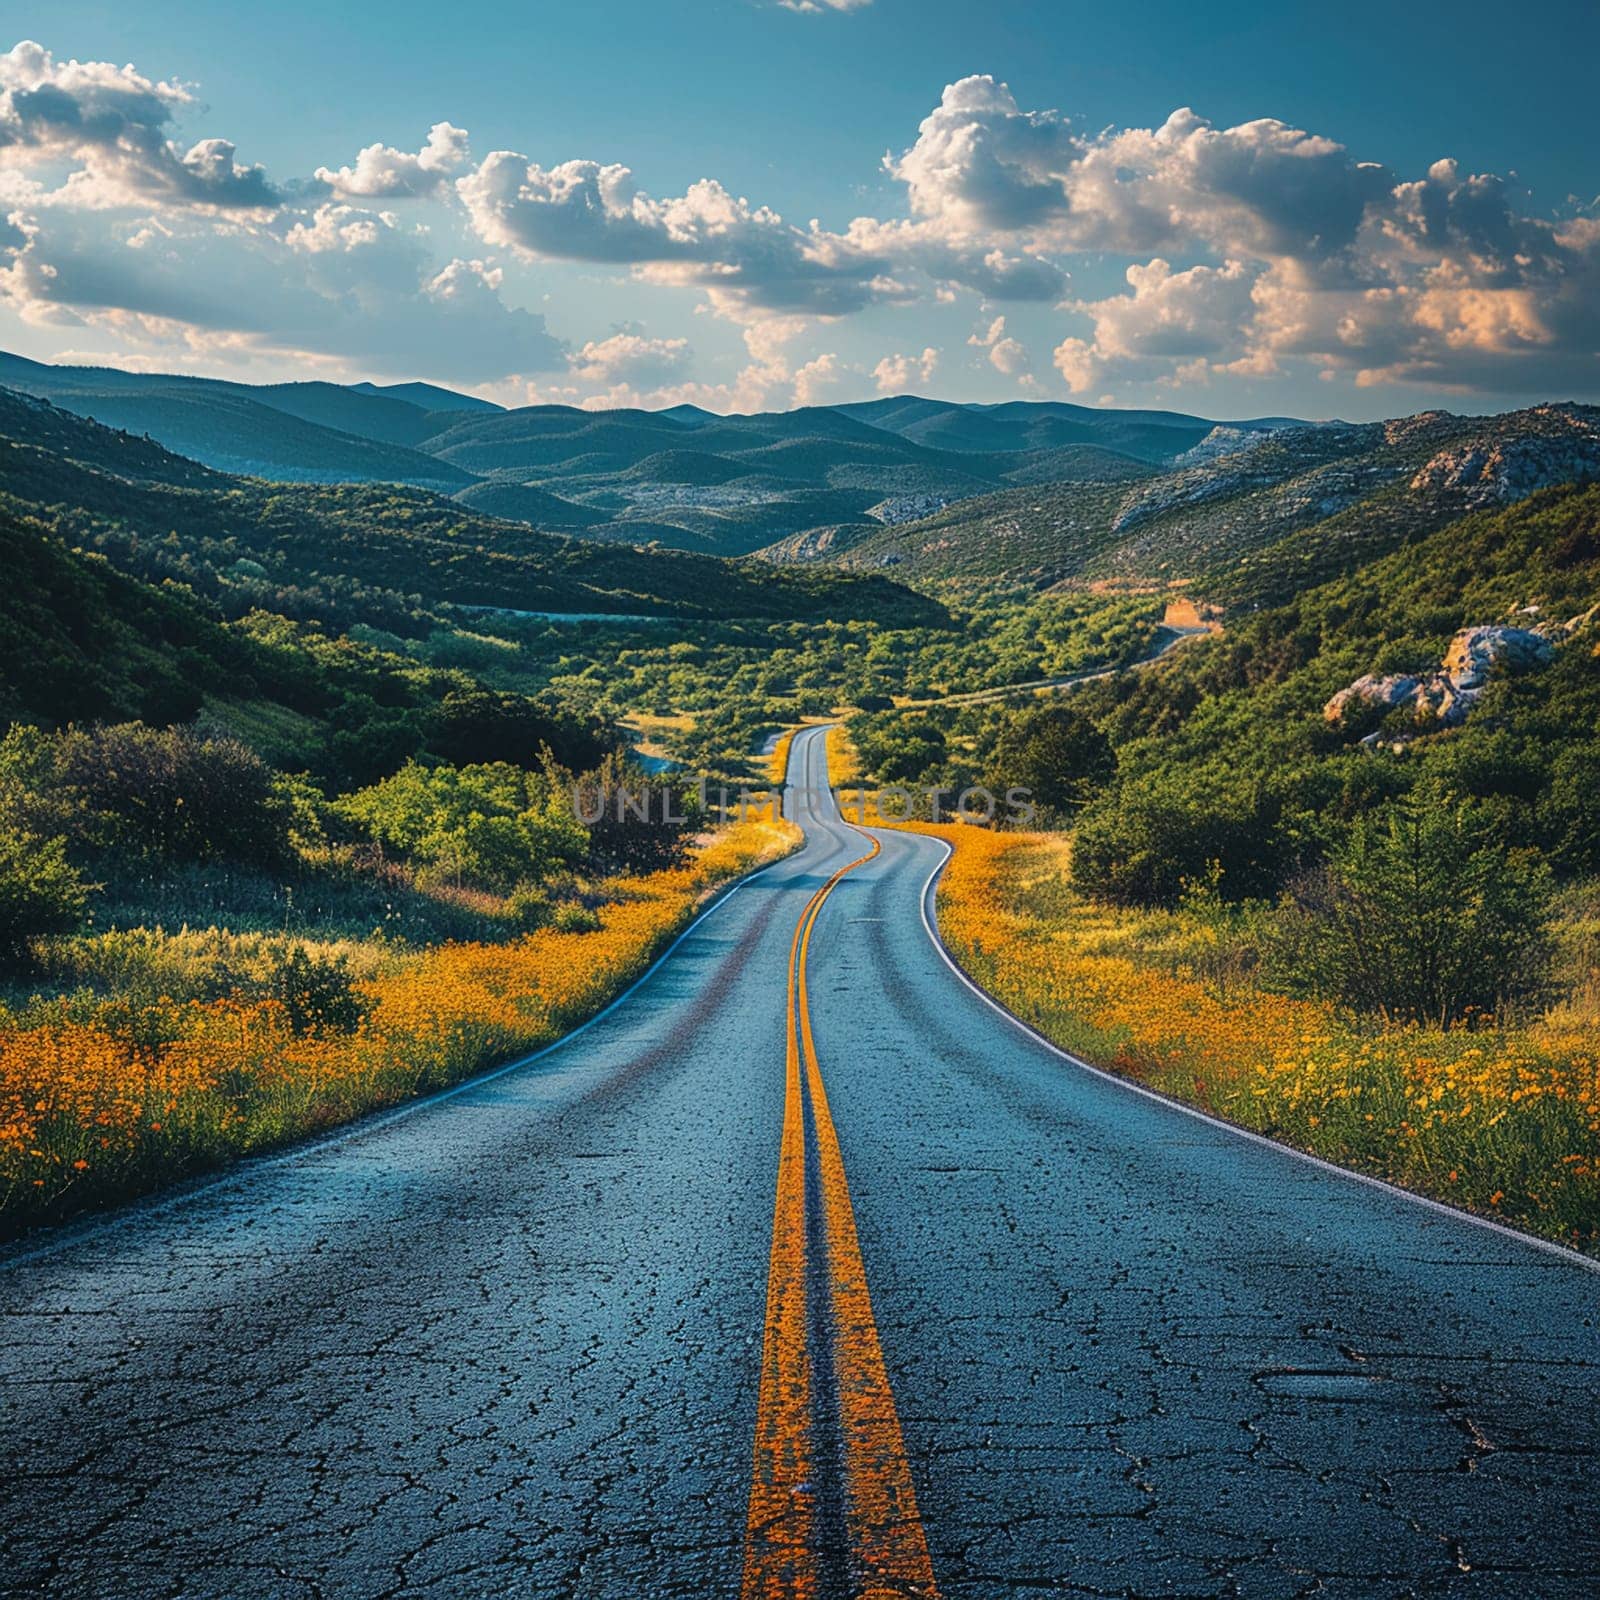 An open road stretching into the horizon, flanked by natural scenery, evoking adventure and possibility.